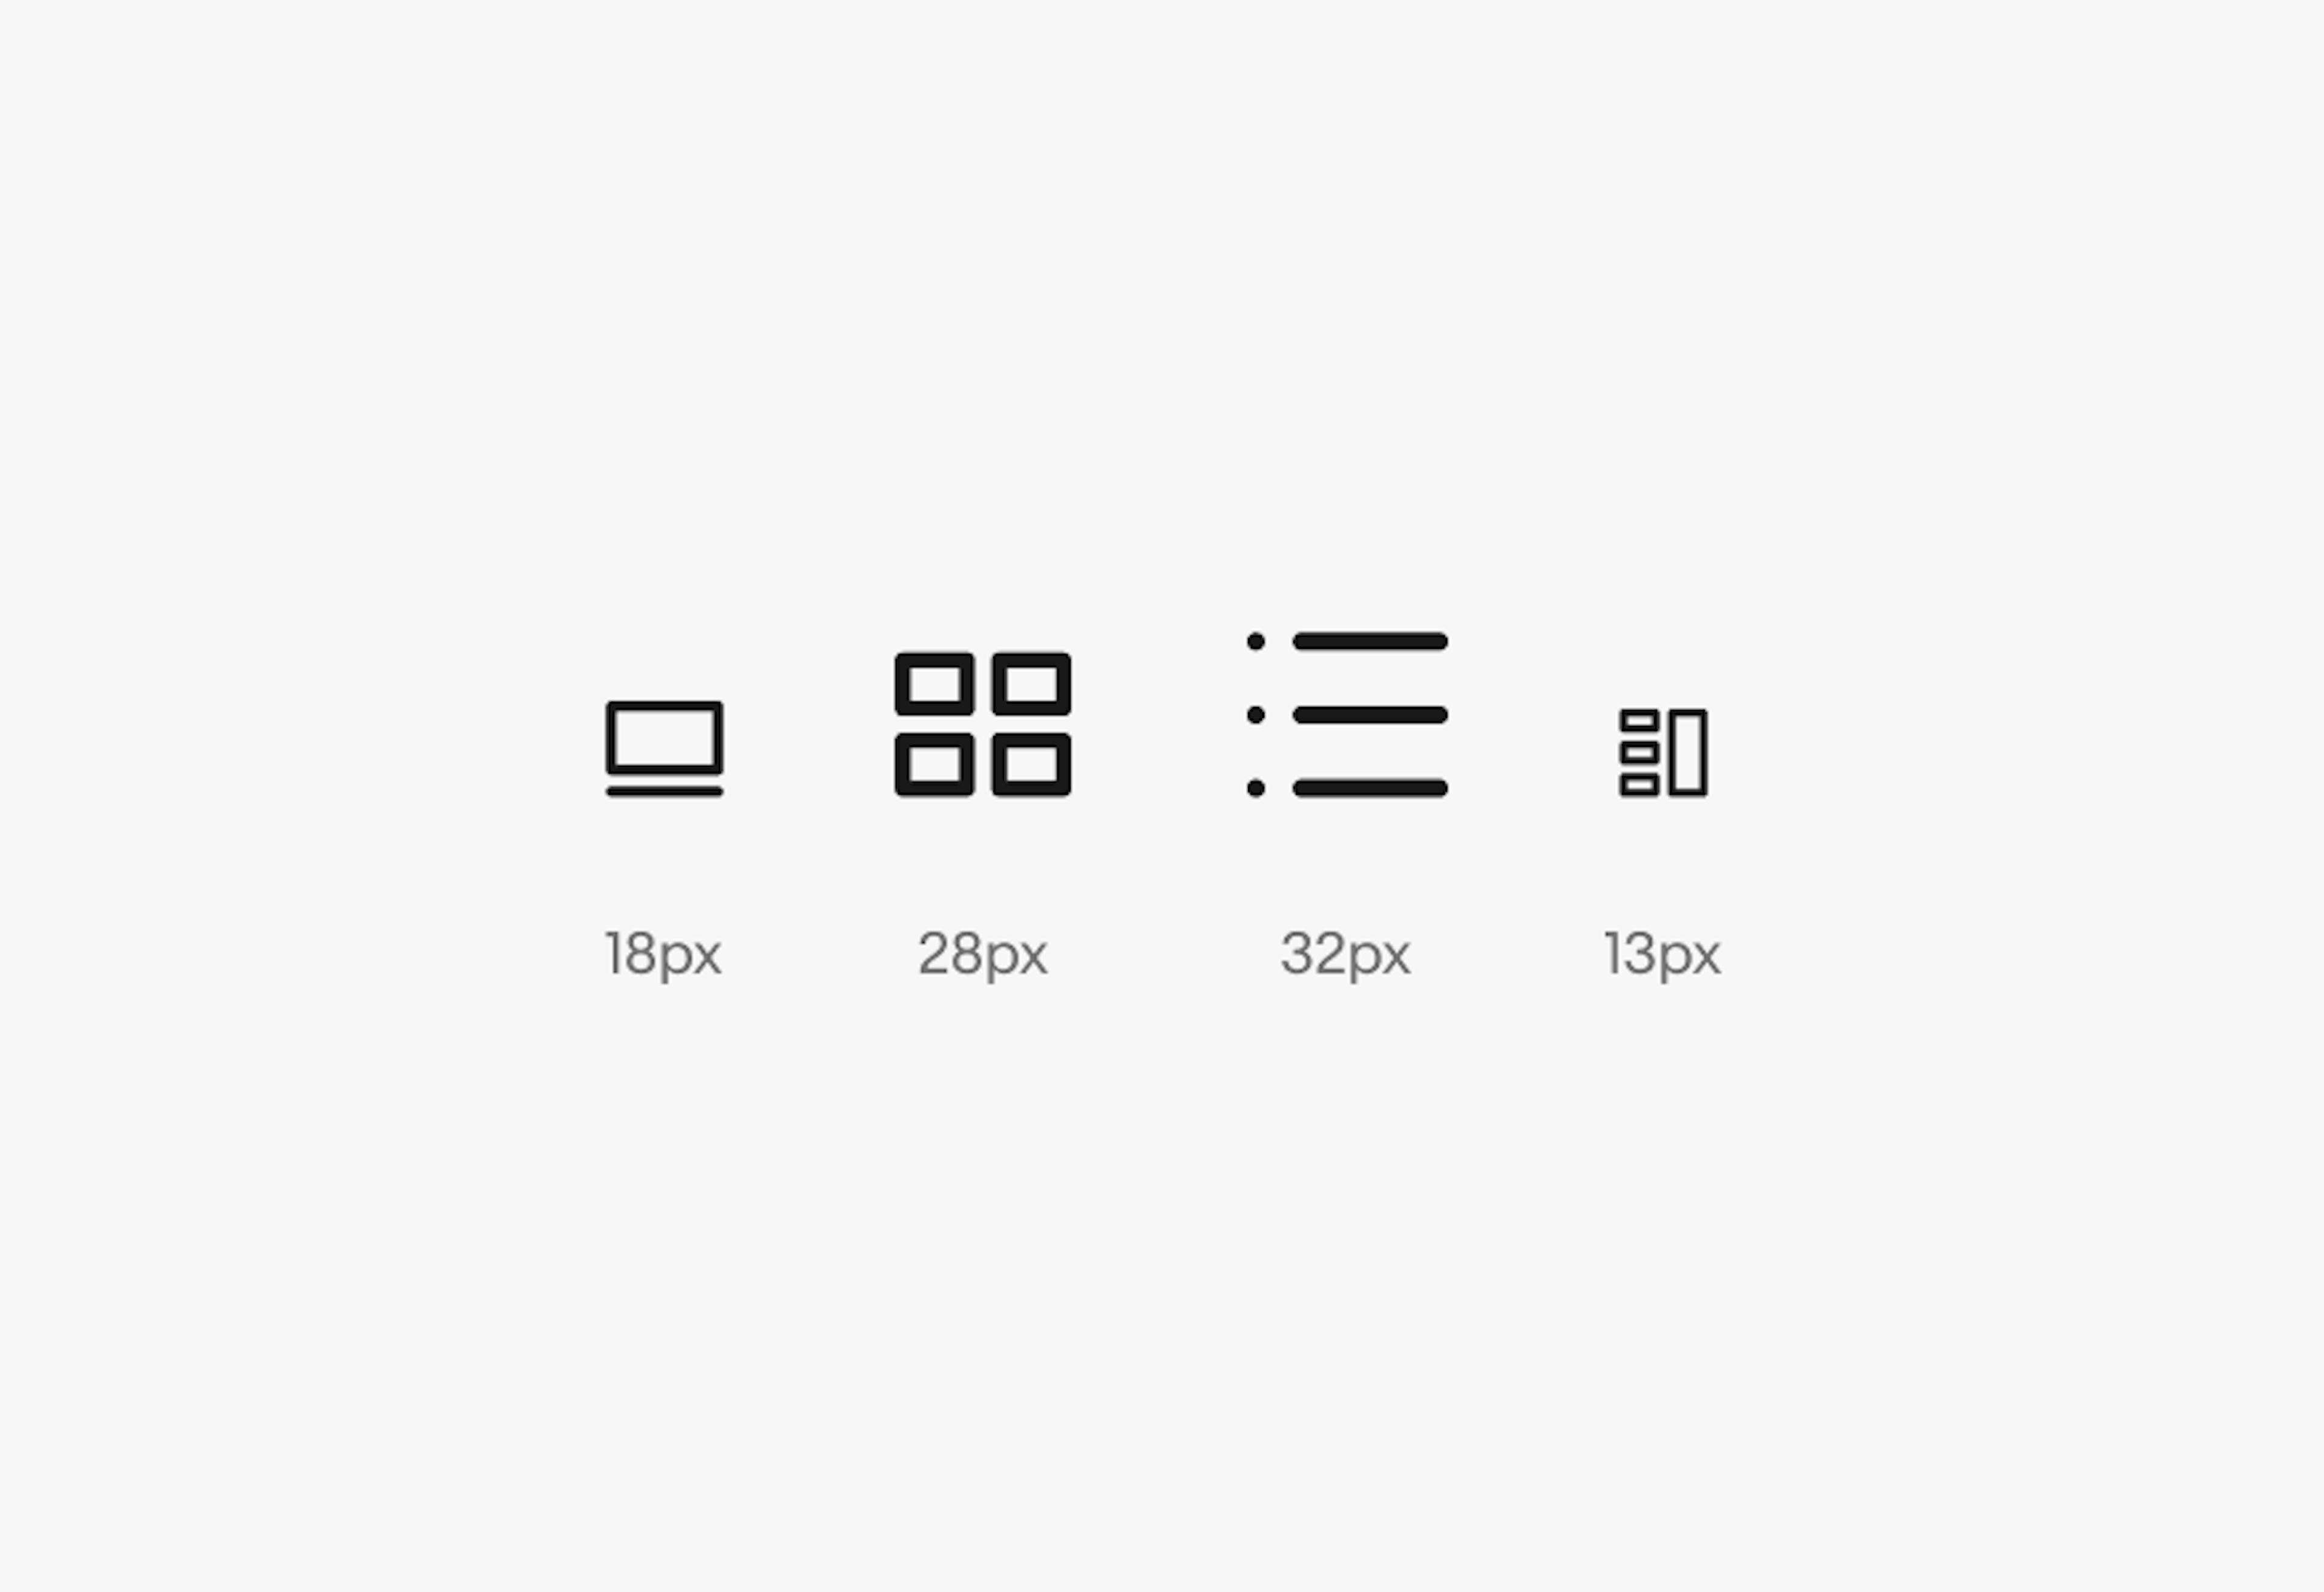 Four grid icons in a row. They have all been resized to the arbitrary sizes: 18, 28, 32, 13px.